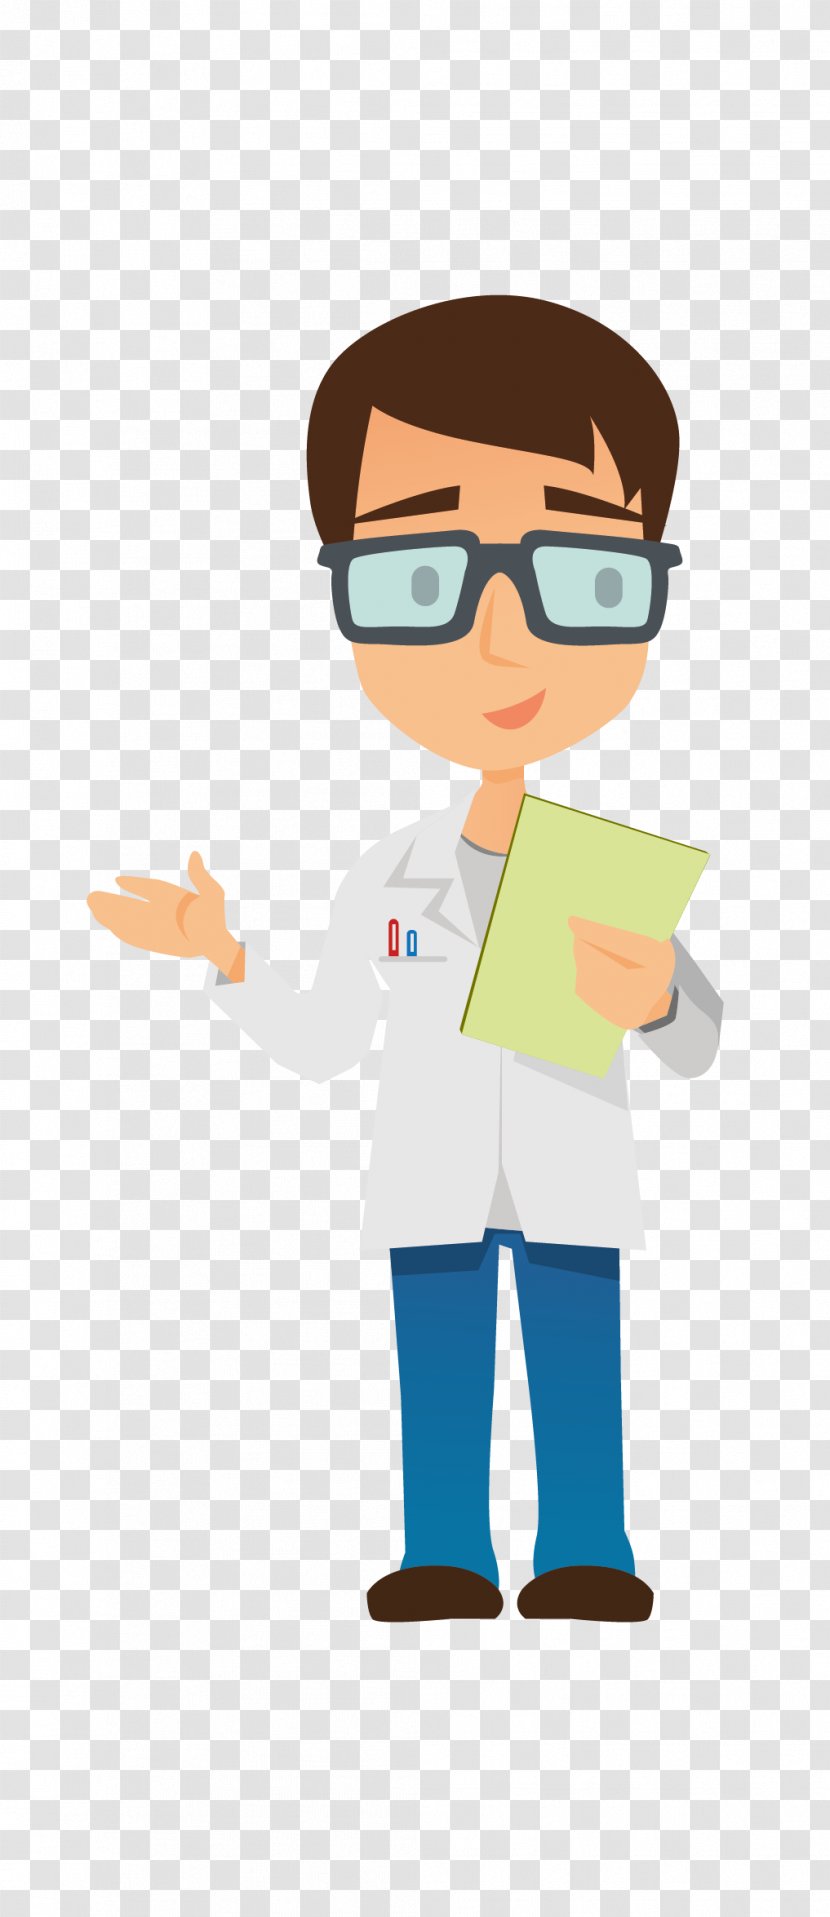 Stethoscope Cartoon - Physician - Health Care Provider Gesture Transparent PNG